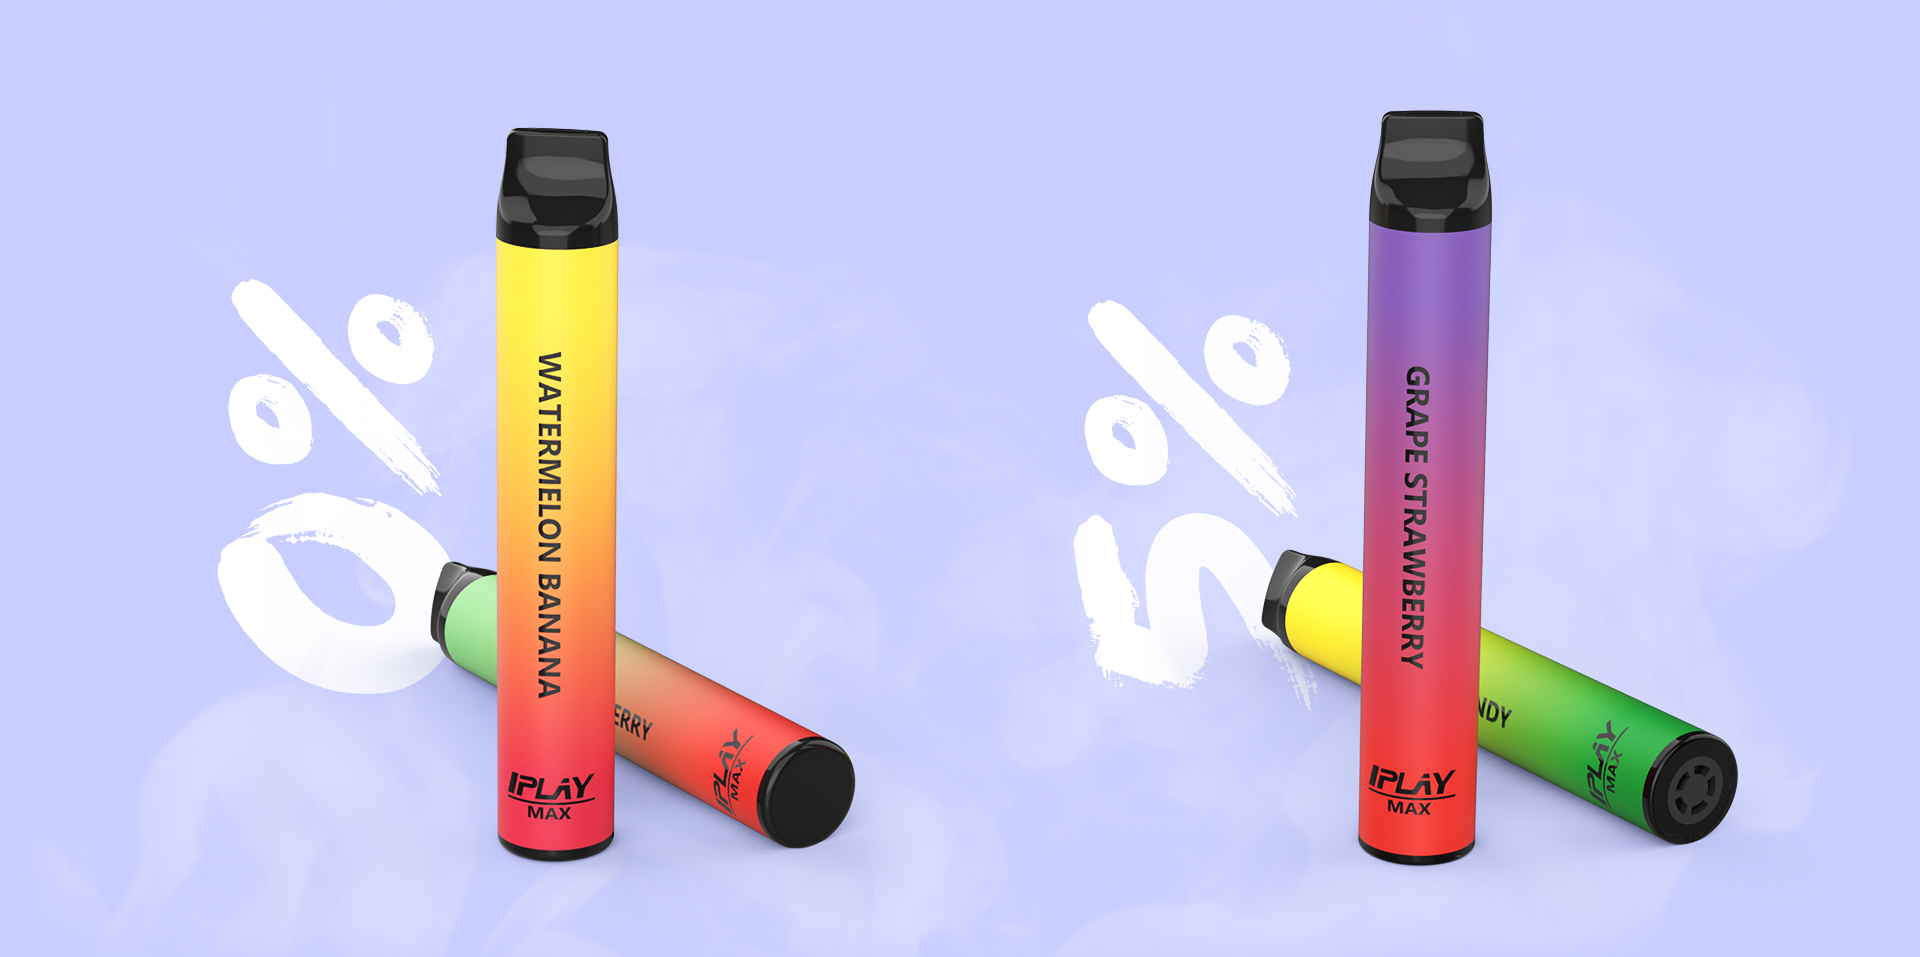 IPLAY MAX - 0% and 5% Nicotine Available